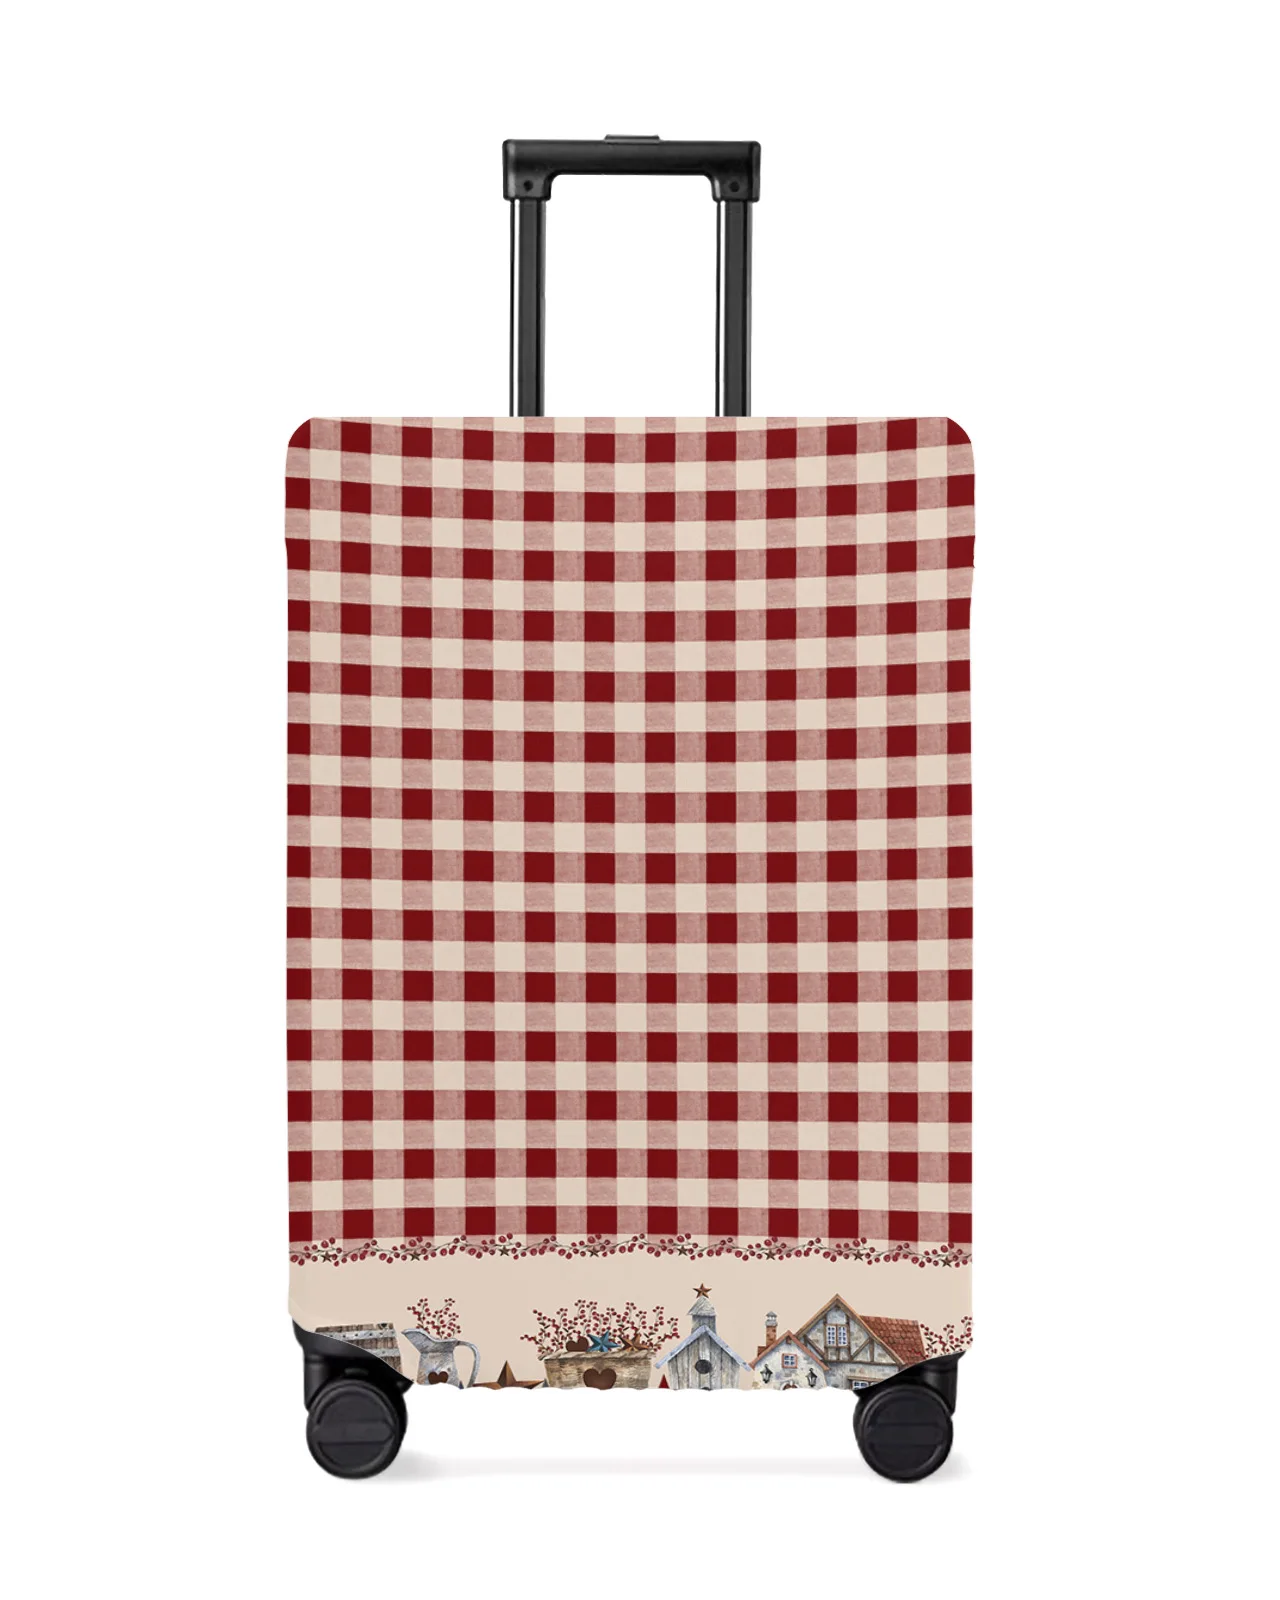 country-star-berry-retro-red-plaid-travel-luggage-protective-cover-travel-accessories-suitcase-elastic-dust-case-protect-sleeve